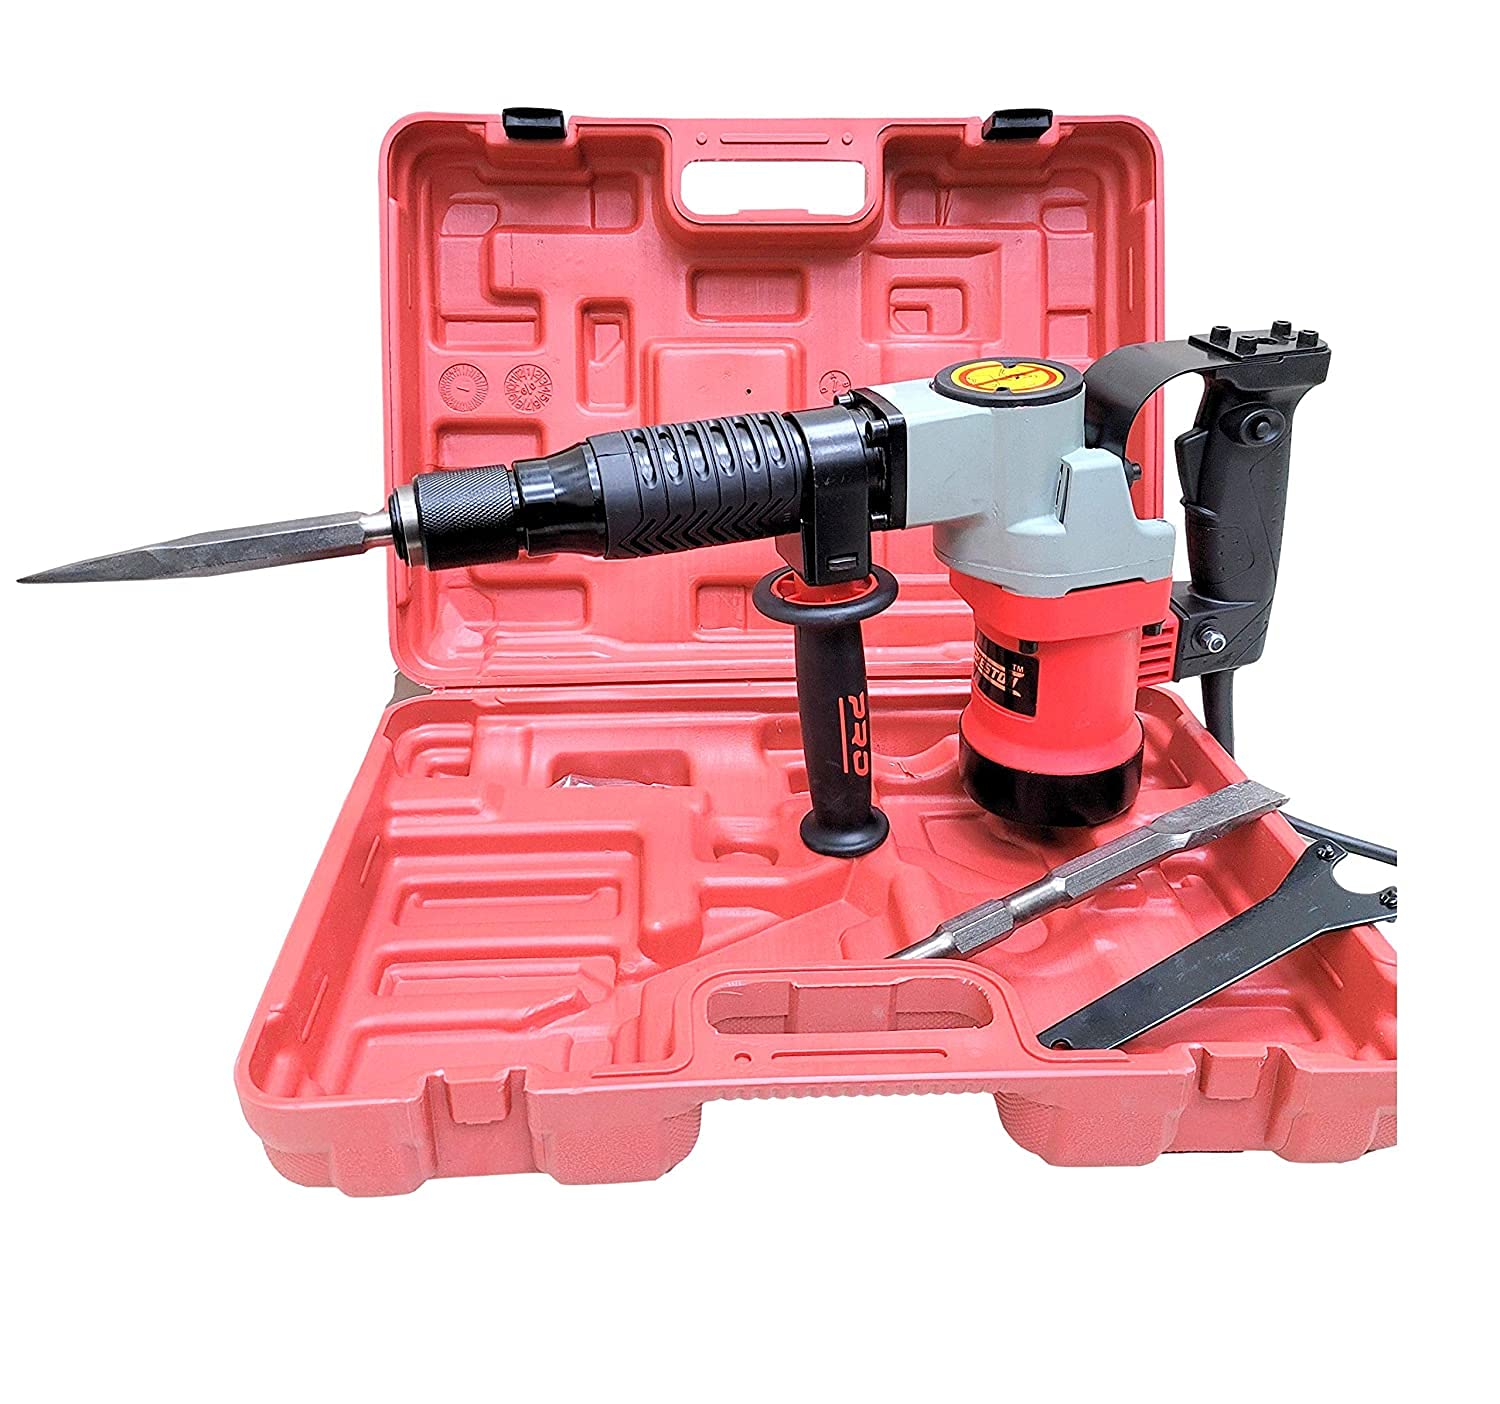 Cheston Powerful Corded Electric 5Kg Demolition Hammer/Concrete Breaker (RED) With Two Chisels Flat & Pointed With Anti Vibration Control Handle (18mm Chuck) 900W high-speed 2950 rounds